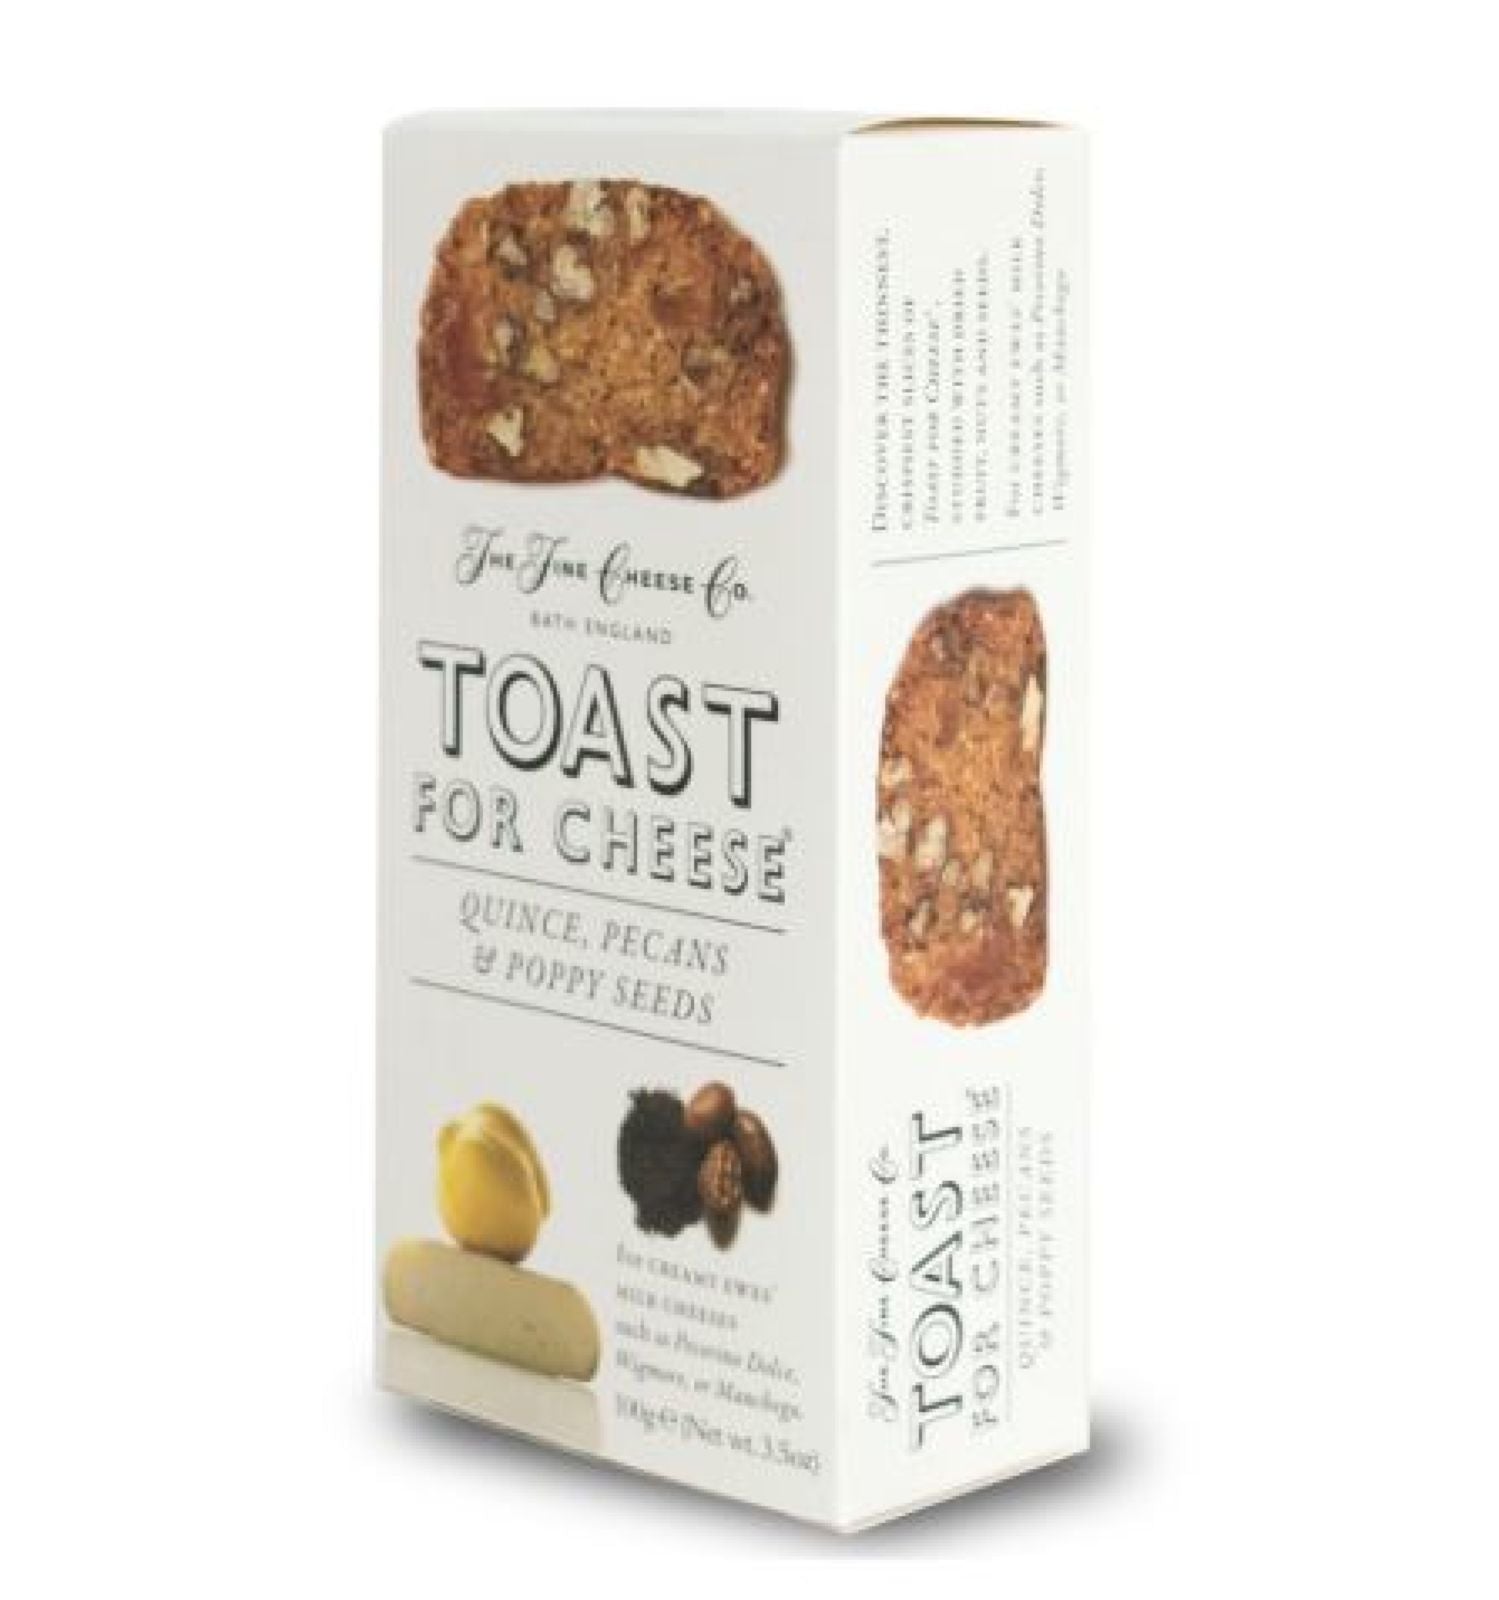 The Fine Cheese Co. Toast for Cheese Quinces, Pecans & Poppy Seeds 100g